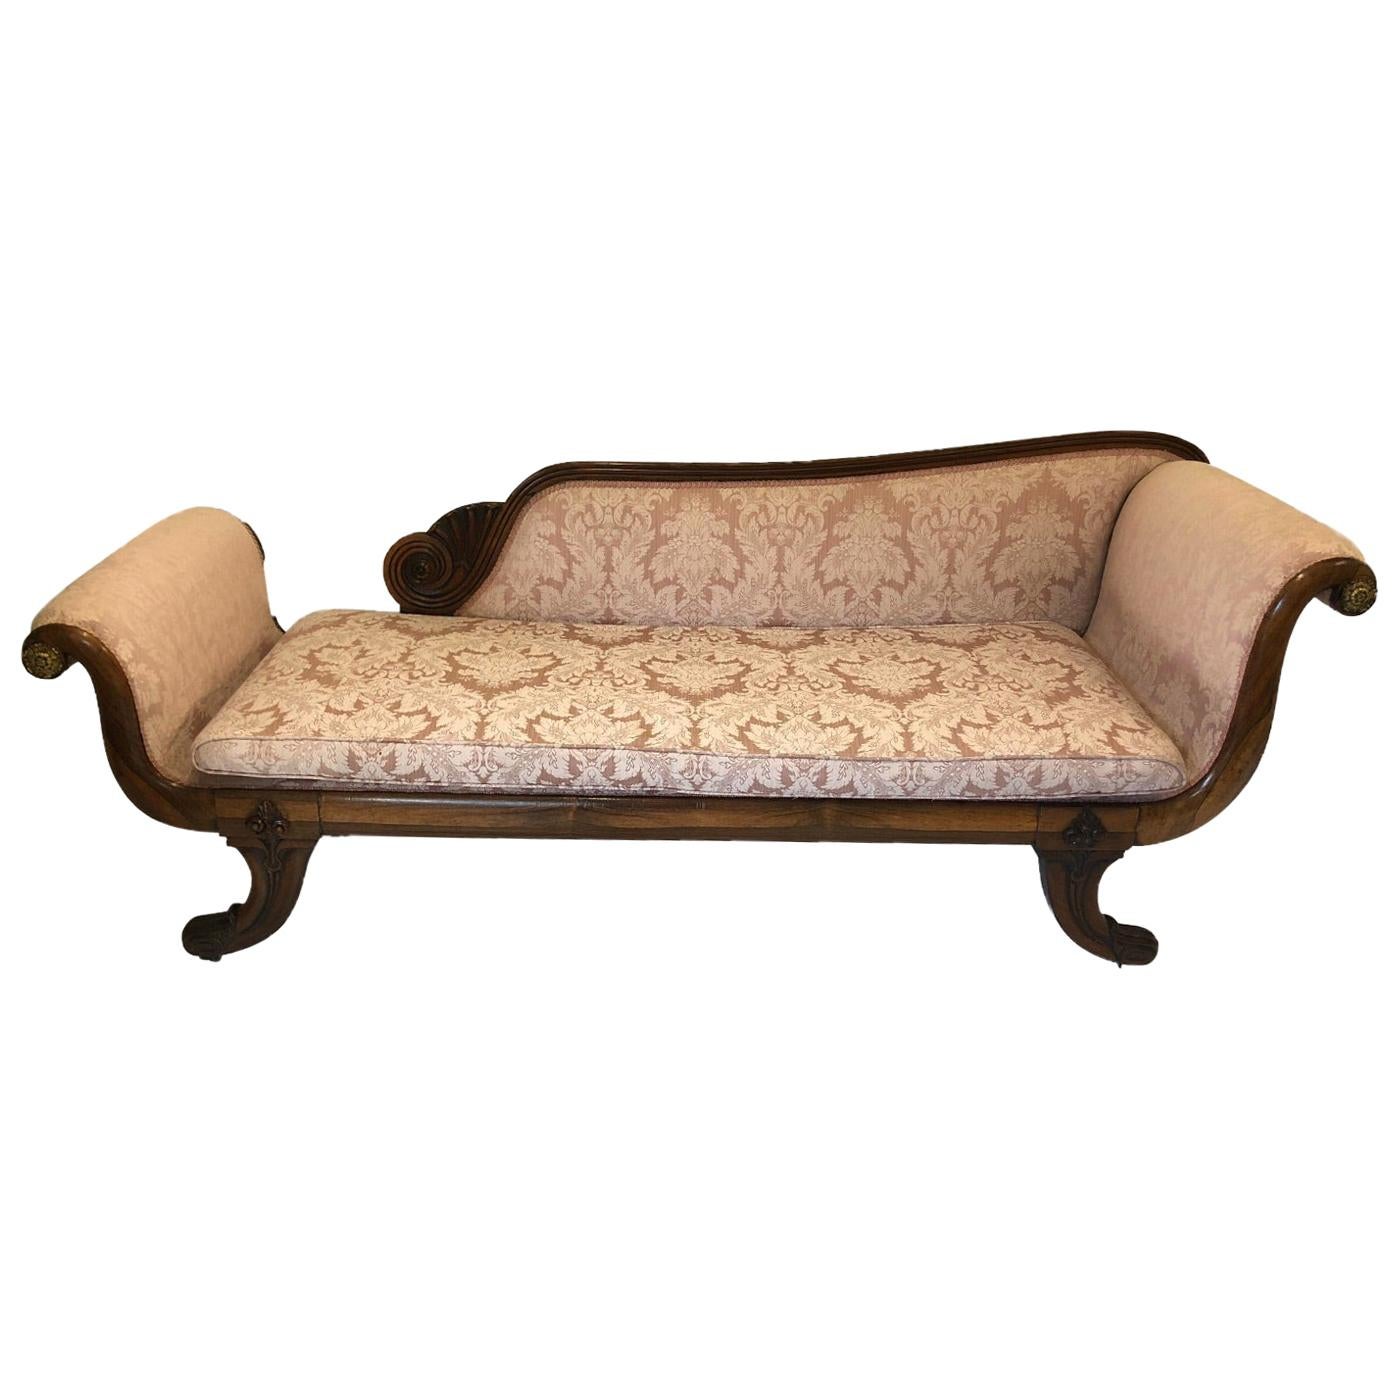 Fine Regency Rosewood Chaise or Daybed For Sale